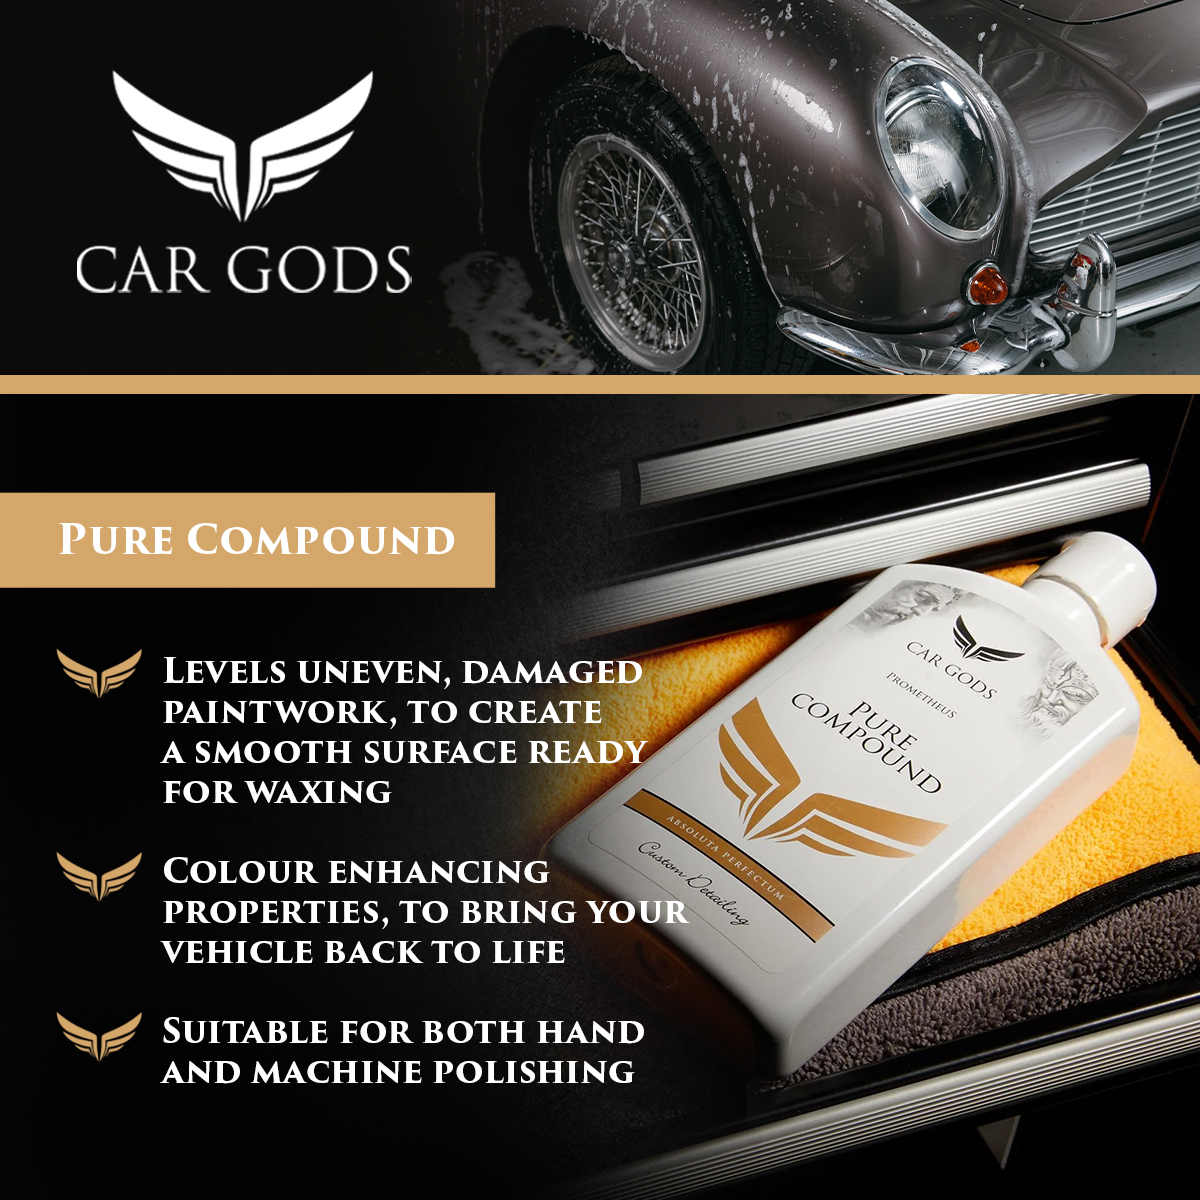 Car Gods Pure Compound. Suitable for hand or machine polishing, Car Gods Pure Compound is designed to manually deep clean your car’s bodywork, levelling uneven and damaged paintwork to create a smooth surface ready for waxing. The colour enhancement properties of Pure Compound will help bring your vehicle back to life.